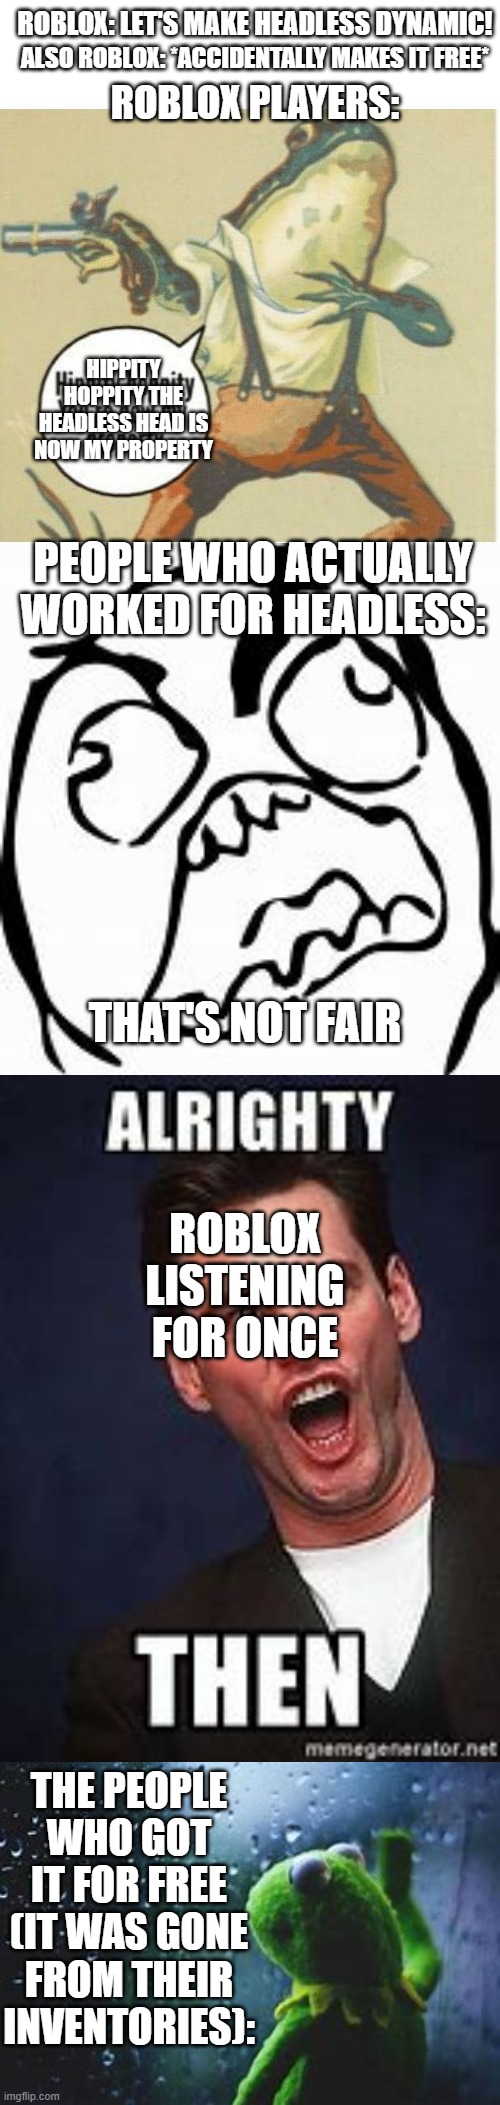 Based off a True Story (Sorry it's so Long) | ROBLOX: LET'S MAKE HEADLESS DYNAMIC! ALSO ROBLOX: *ACCIDENTALLY MAKES IT FREE*; ROBLOX PLAYERS:; HIPPITY HOPPITY THE HEADLESS HEAD IS NOW MY PROPERTY; PEOPLE WHO ACTUALLY WORKED FOR HEADLESS:; THAT'S NOT FAIR; ROBLOX LISTENING FOR ONCE; THE PEOPLE WHO GOT IT FOR FREE (IT WAS GONE FROM THEIR INVENTORIES): | image tagged in hippity hoppity you're now my property | made w/ Imgflip meme maker